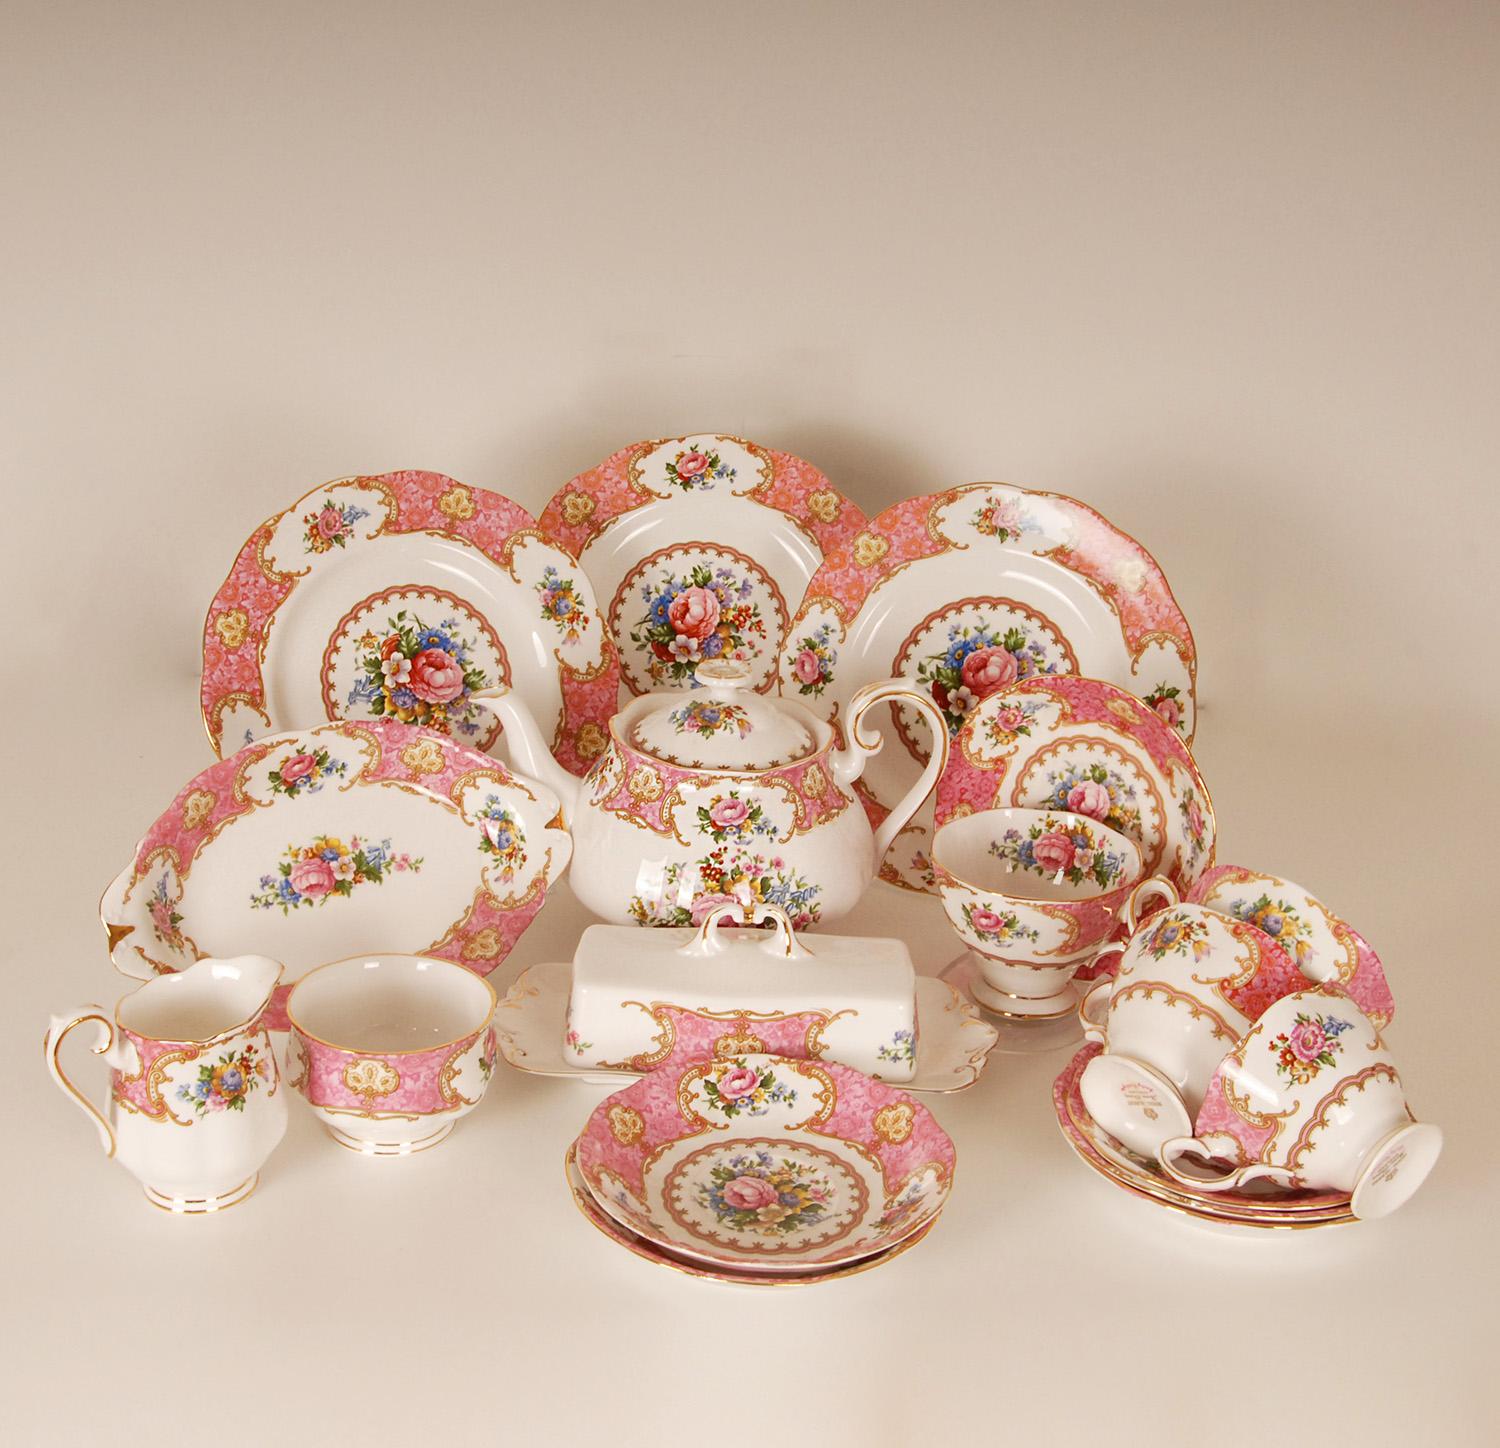 Stunning English fabulous porcelain - Bone China Tea set from Royal Albert.
Decorated with the much coveted Lady Carlyle pattern.
Fabulous featured with Floral sprays and a pink scalloped band bordered with a tan-coloured band and swags. all the